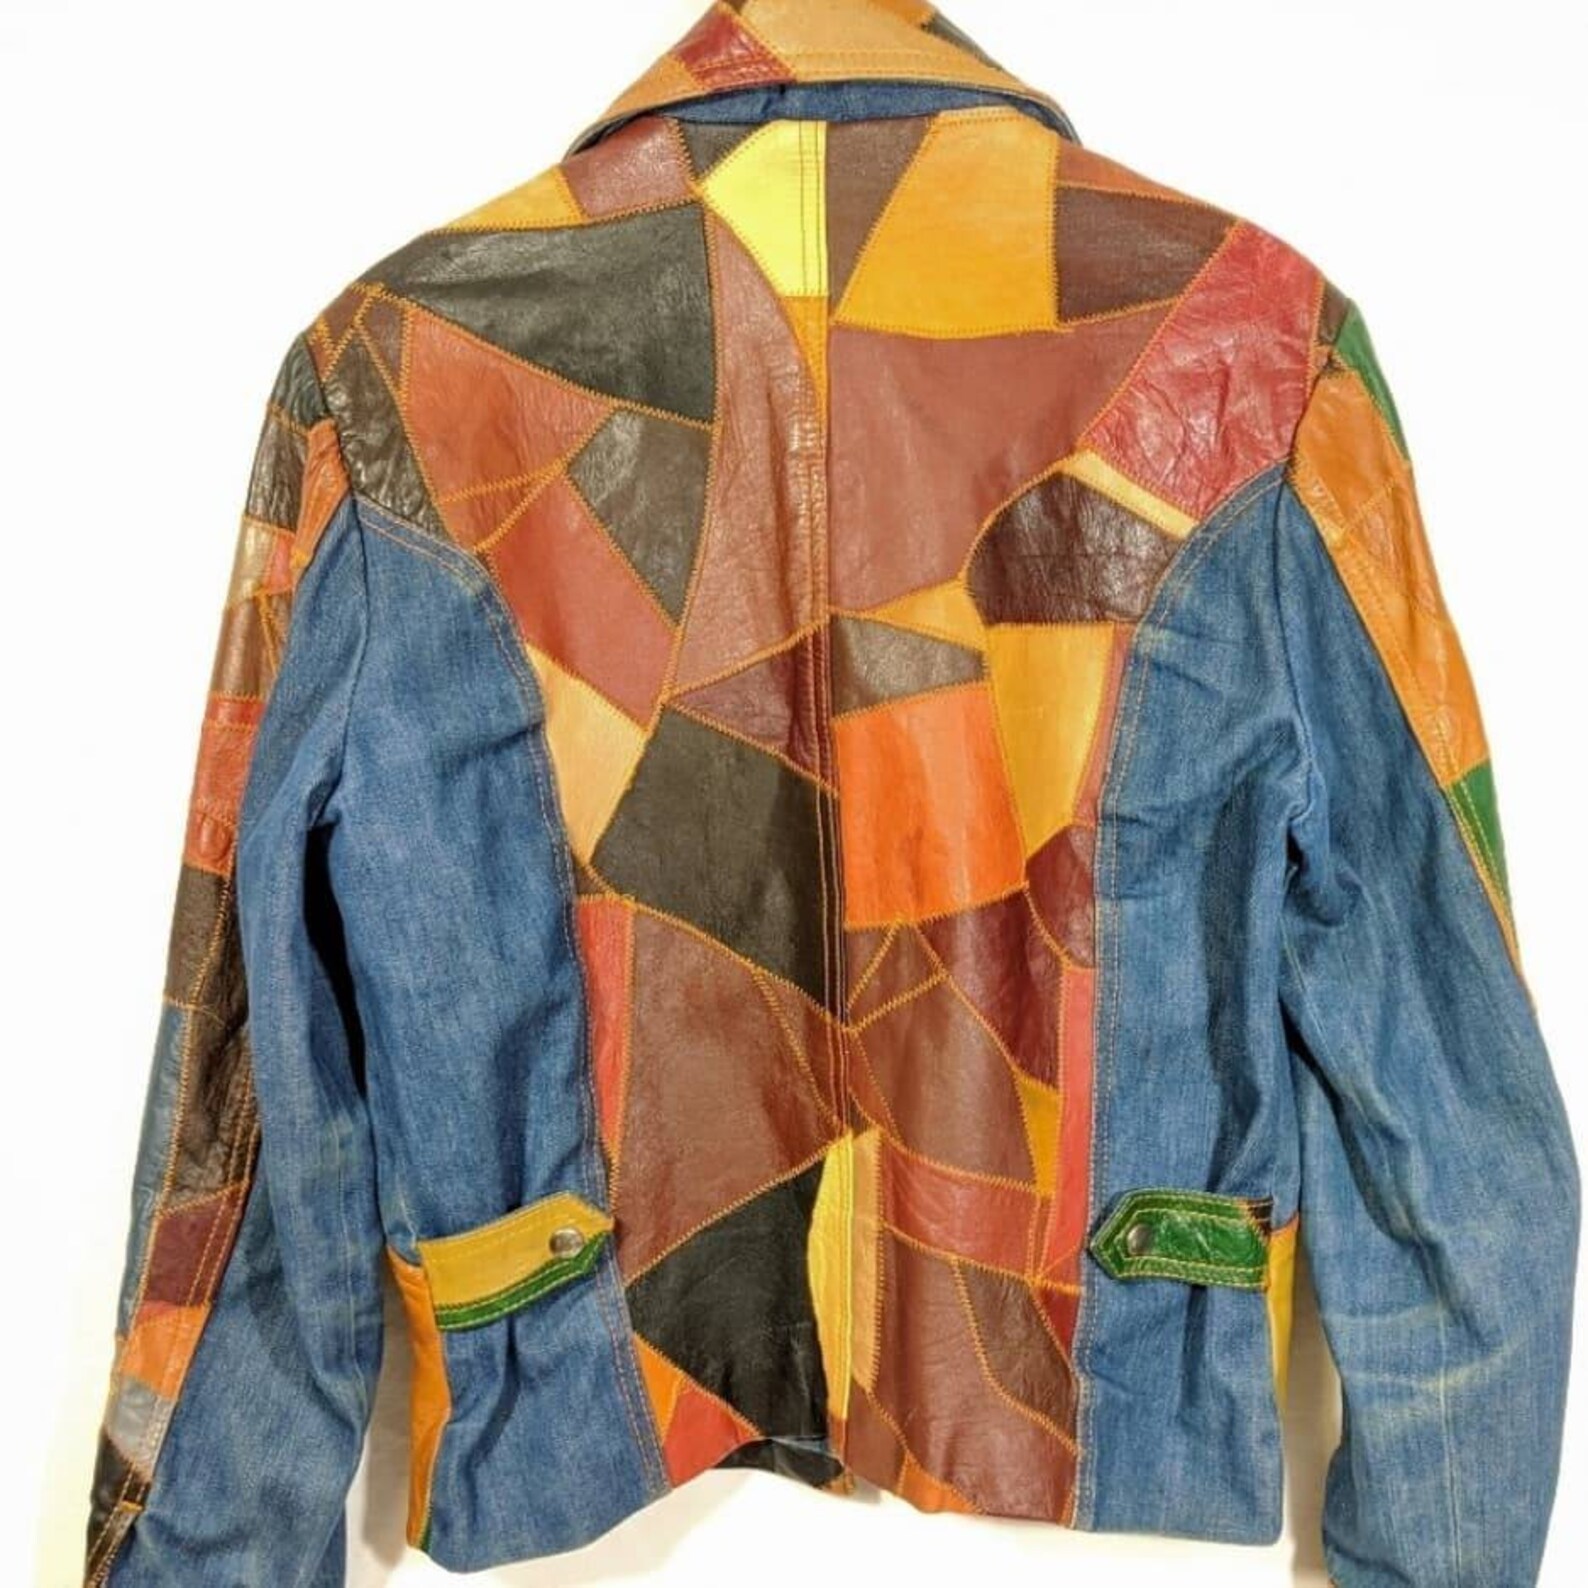 Super Groovy 70s Denim and Leather Patchwork Jacket - Etsy